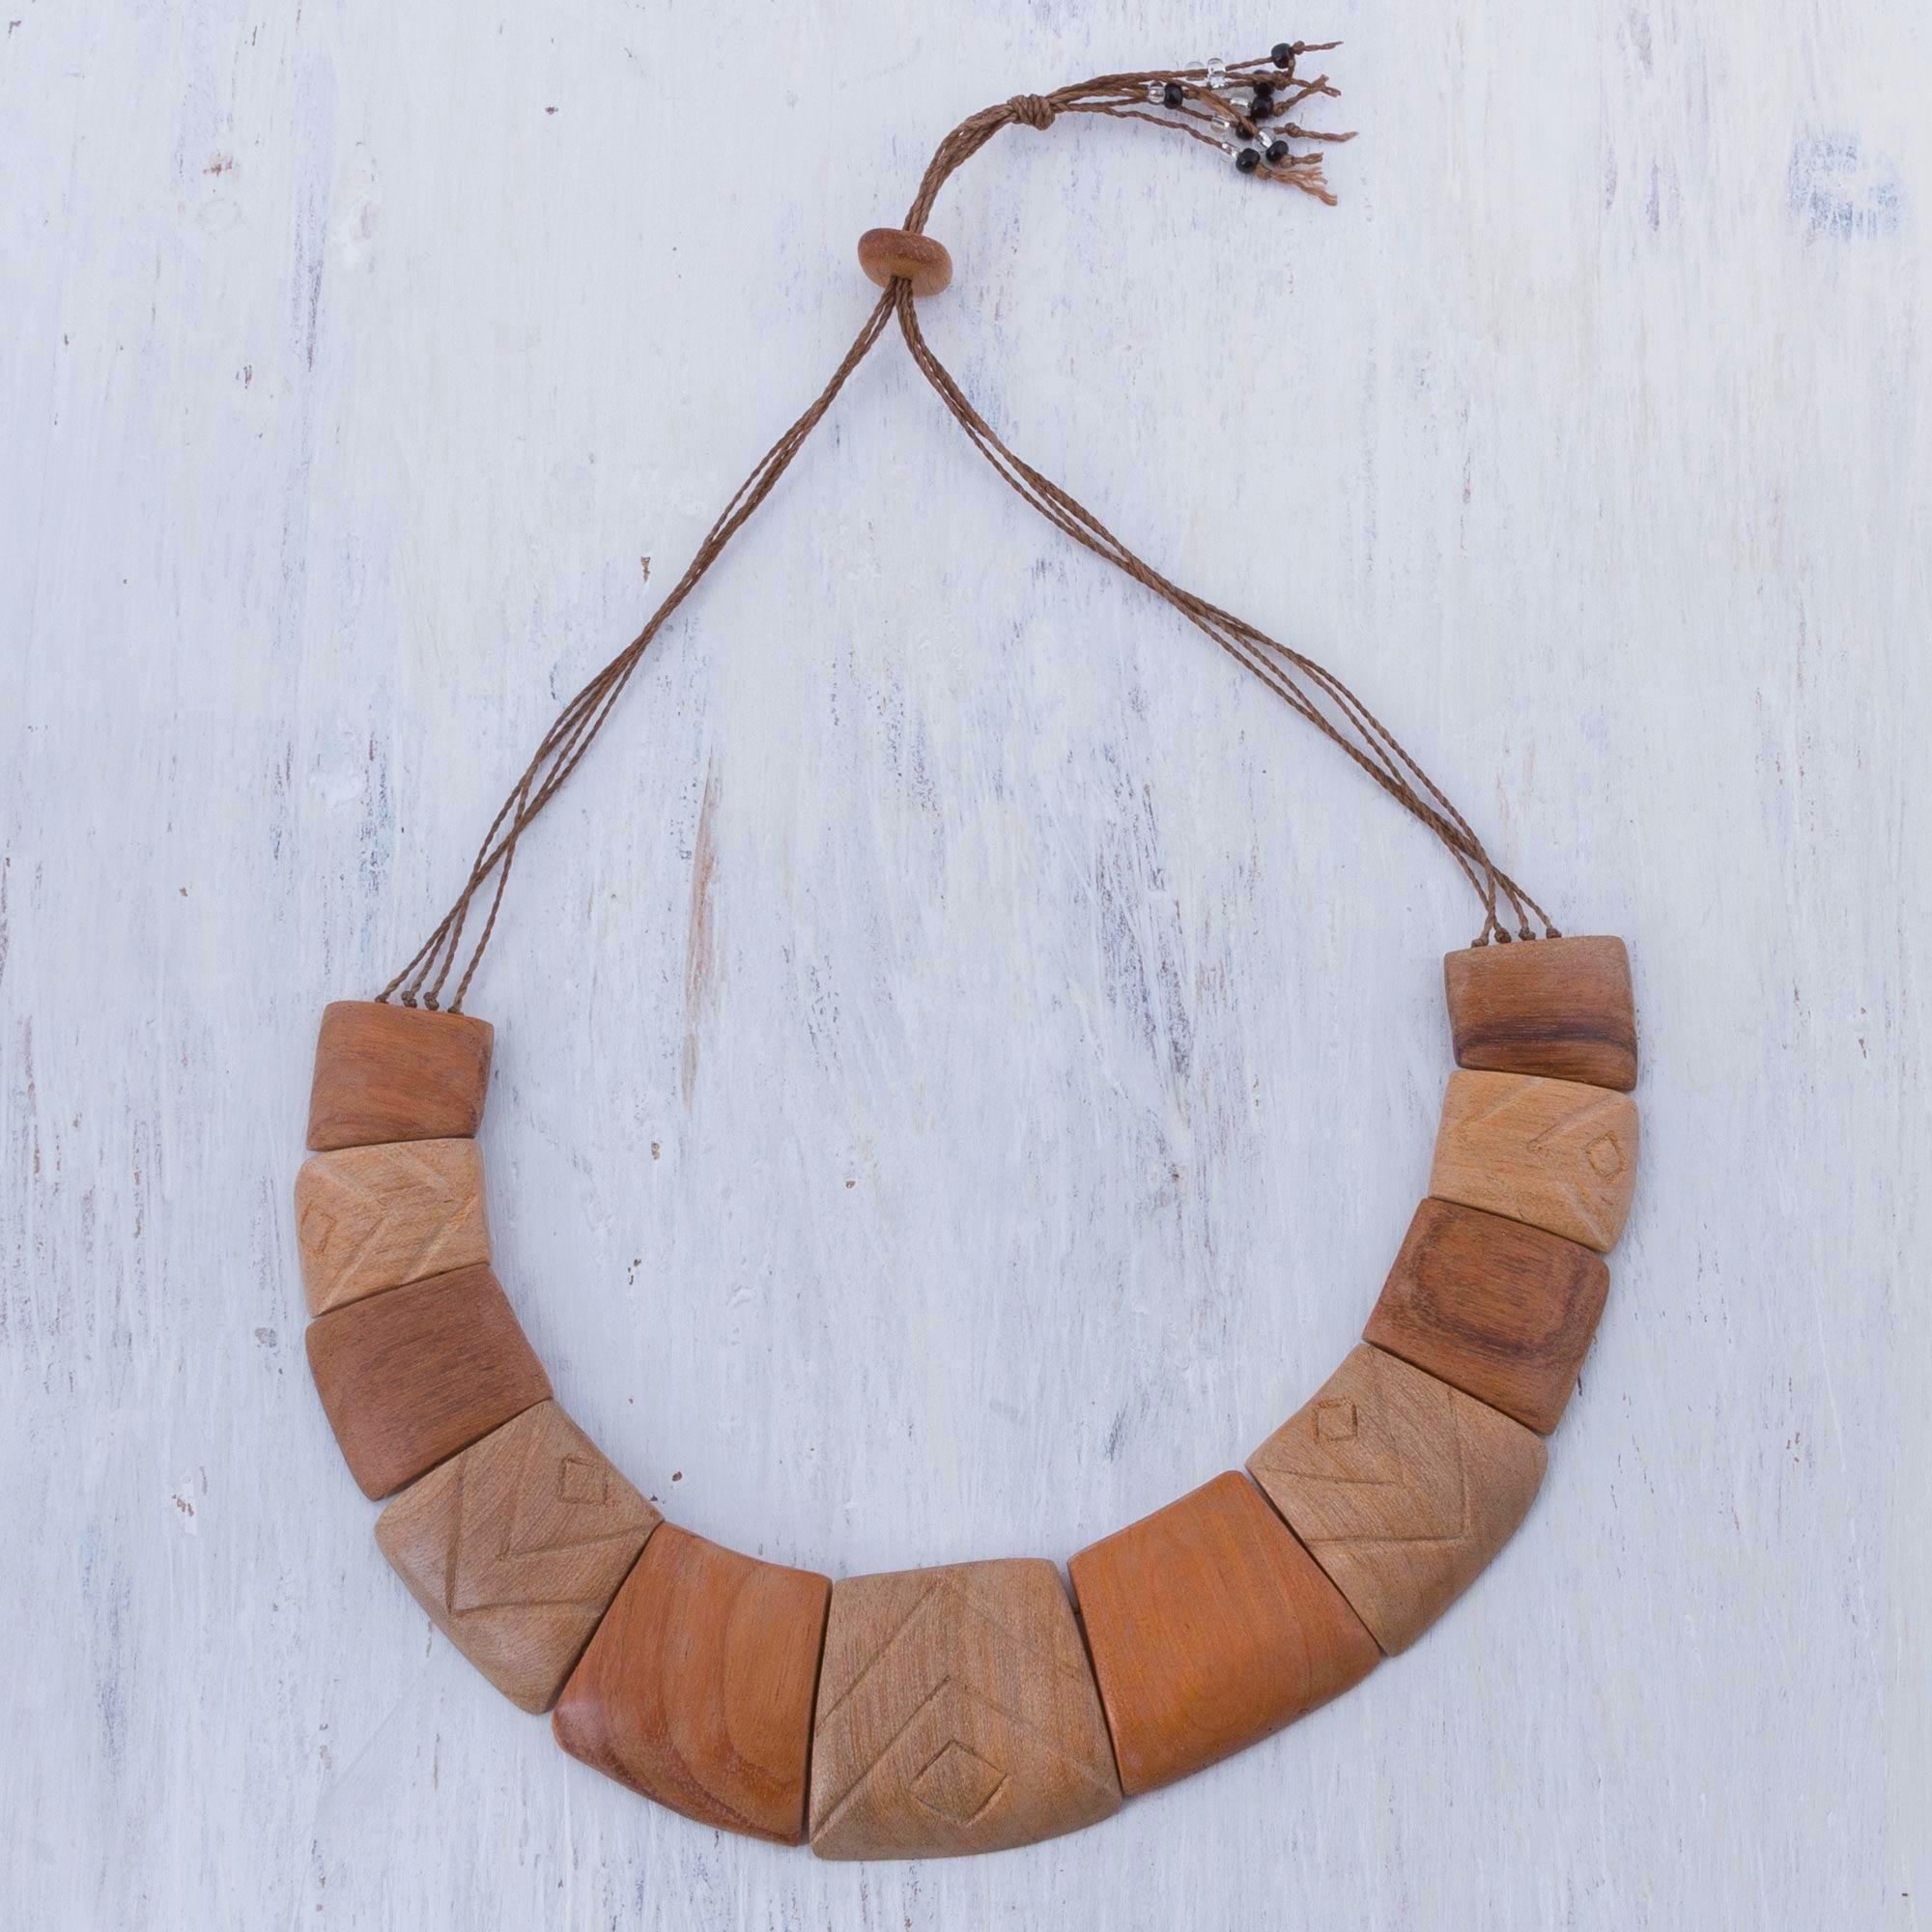 Fierce Nature Handcrafted Brown Wood Statement Necklace from Peruvian artisan Pats